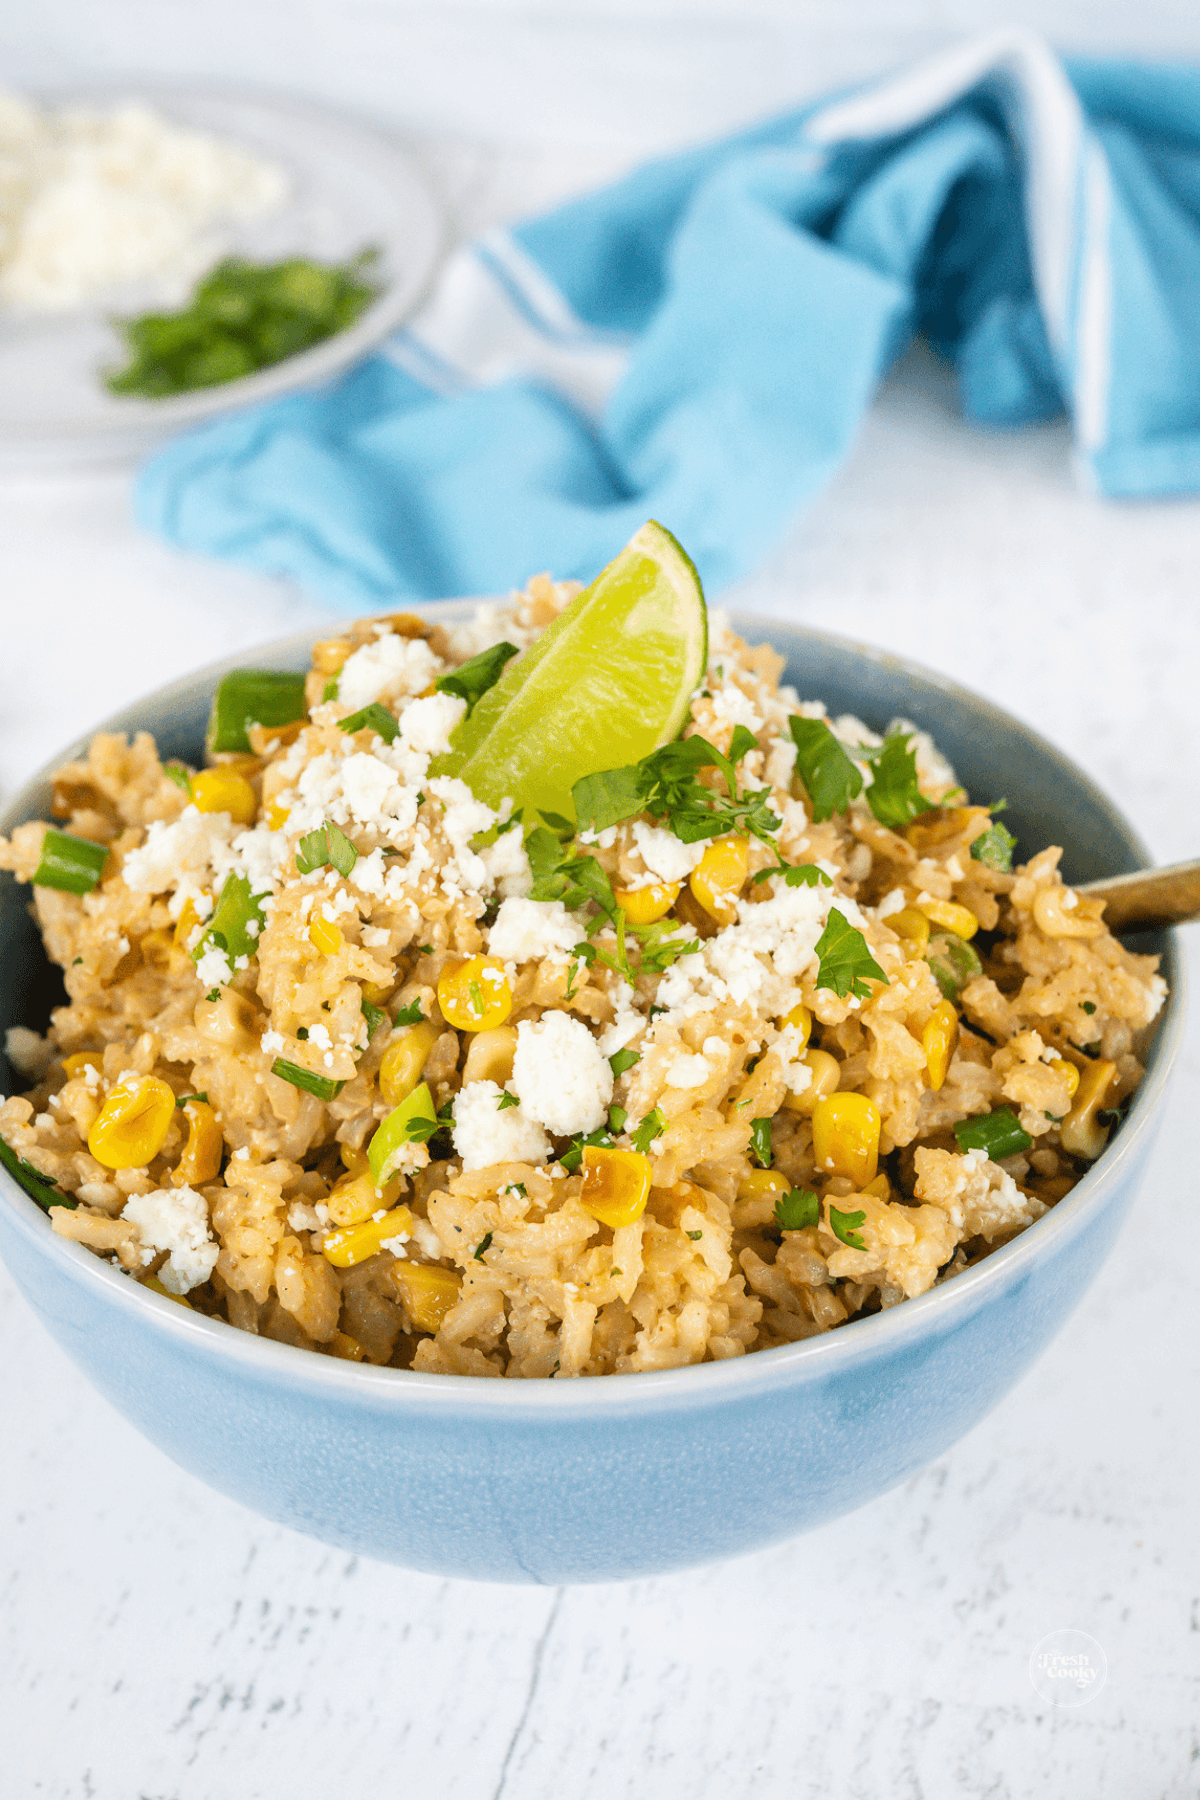 Bowl filled with flavorful Mexican rice and corn.